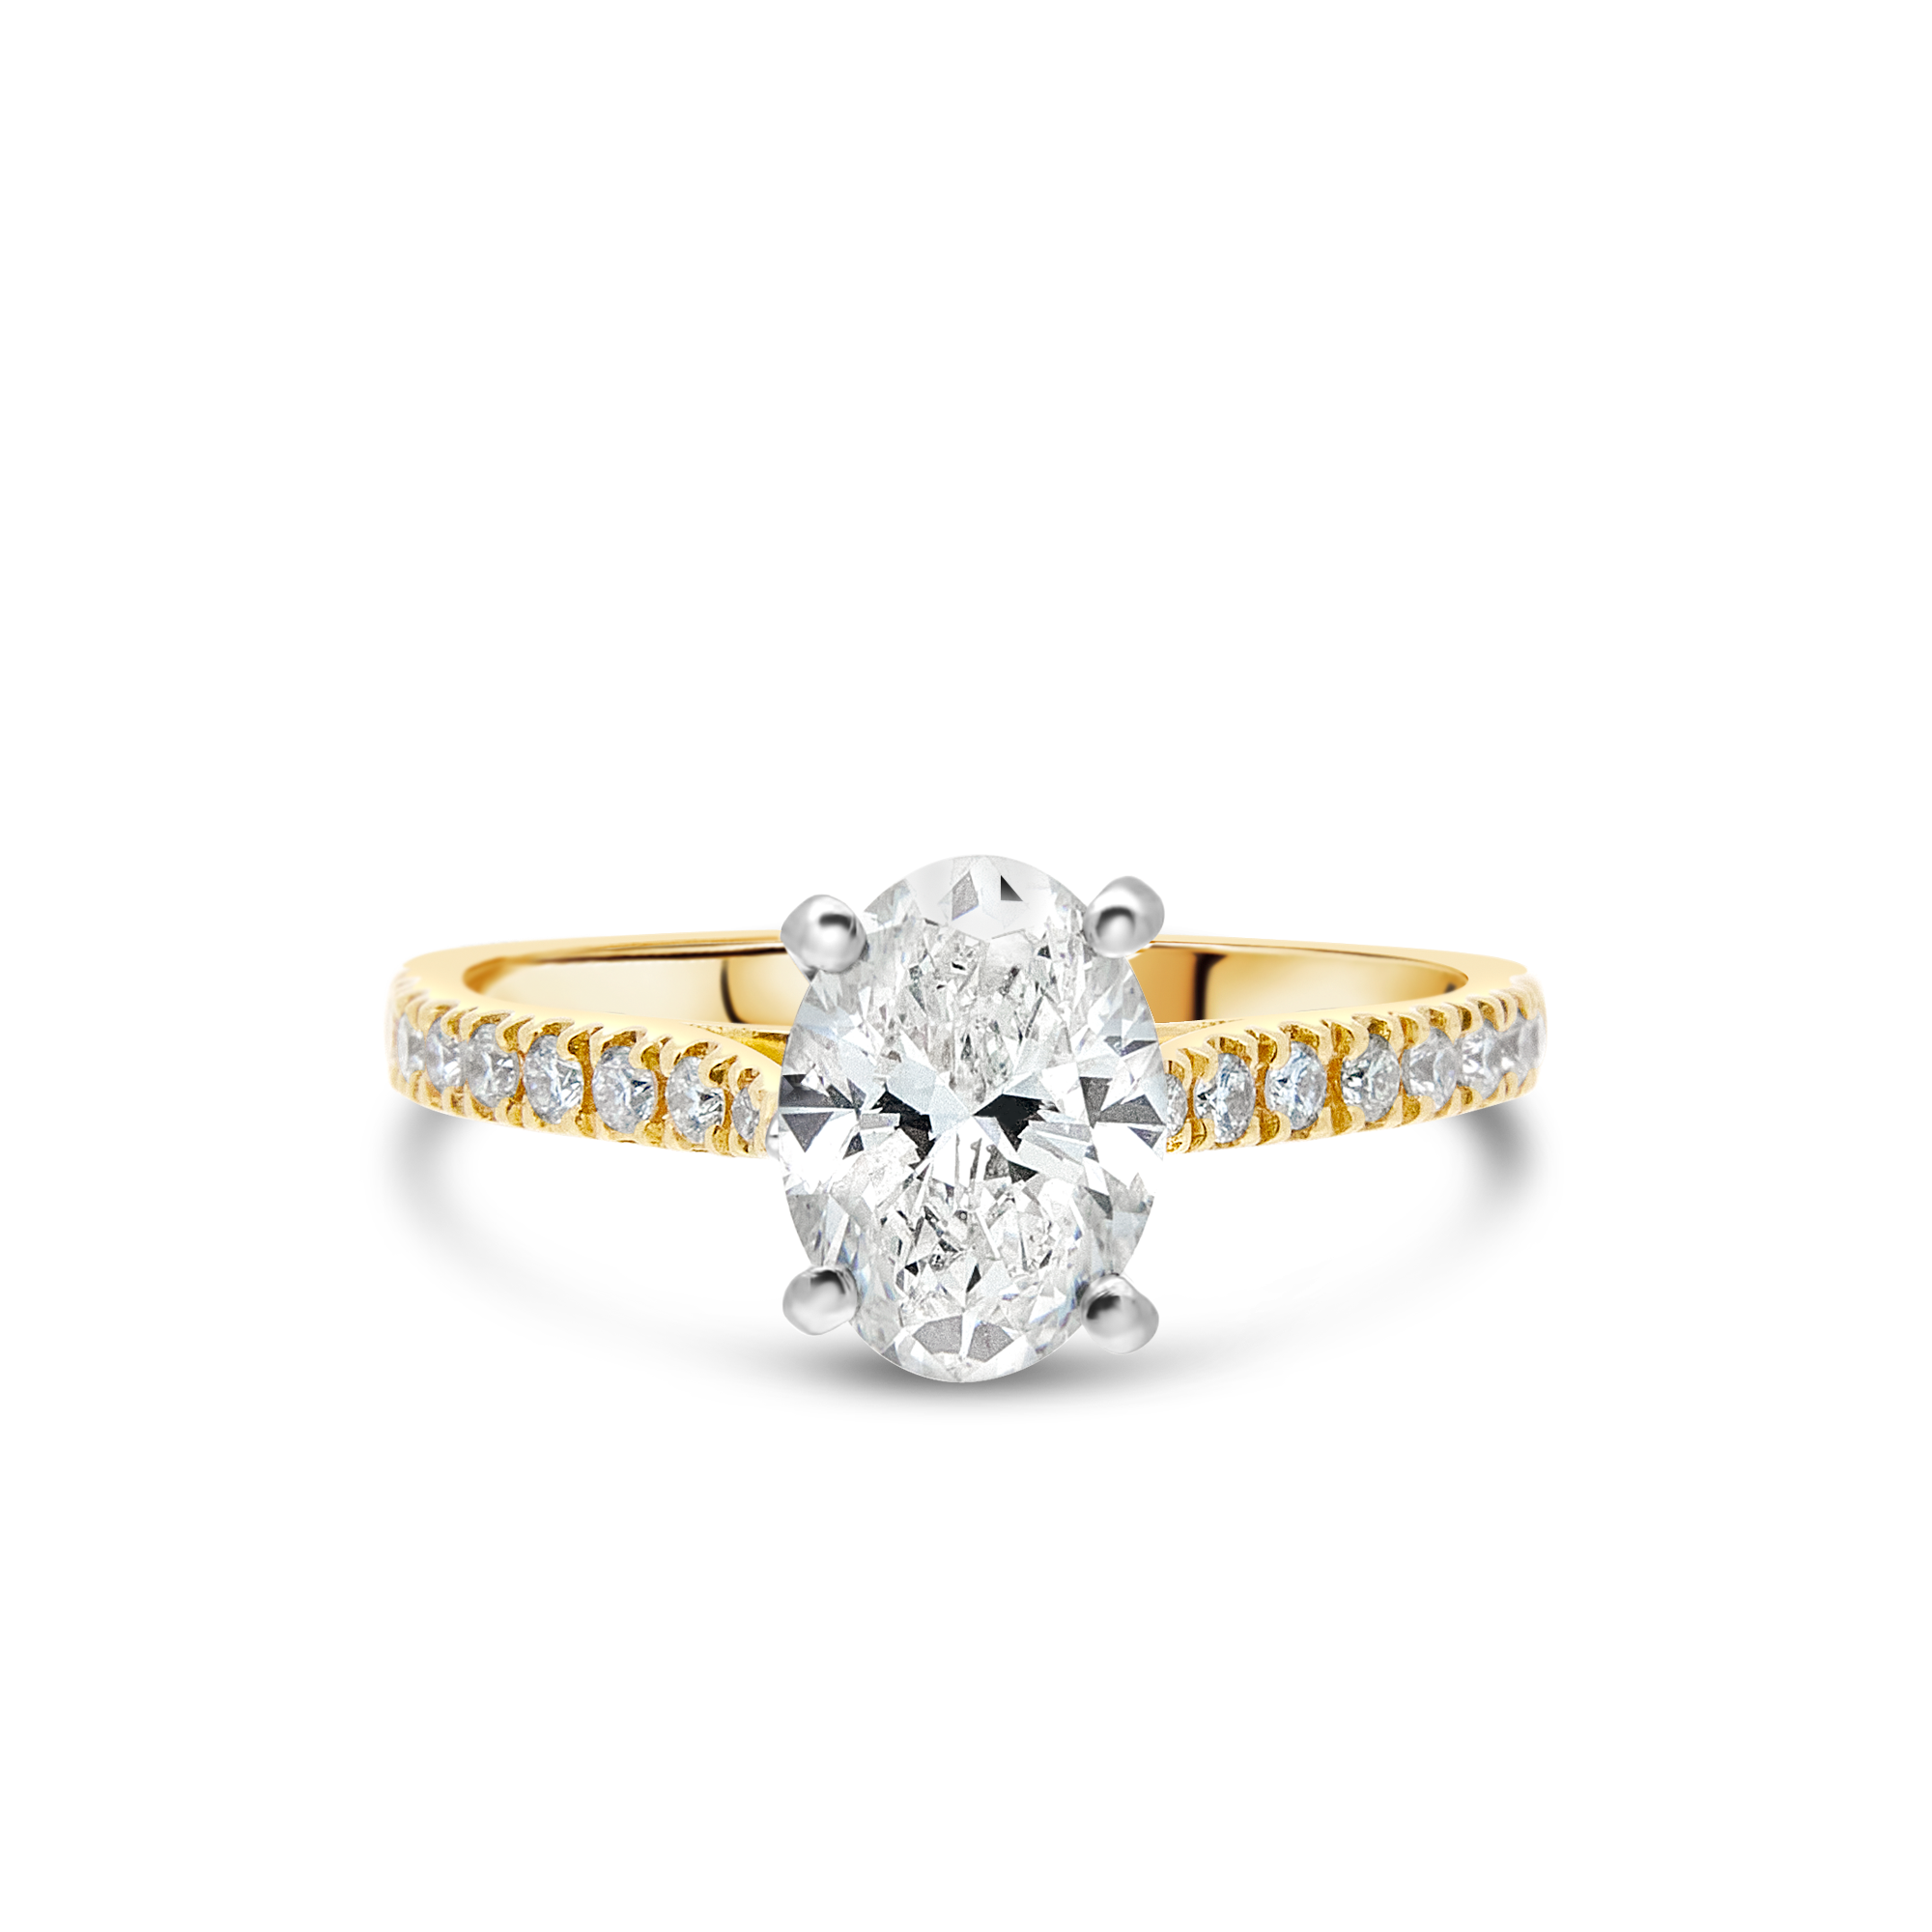 The "J'adore" Oval Diamond with Pavé Band Yellow Gold